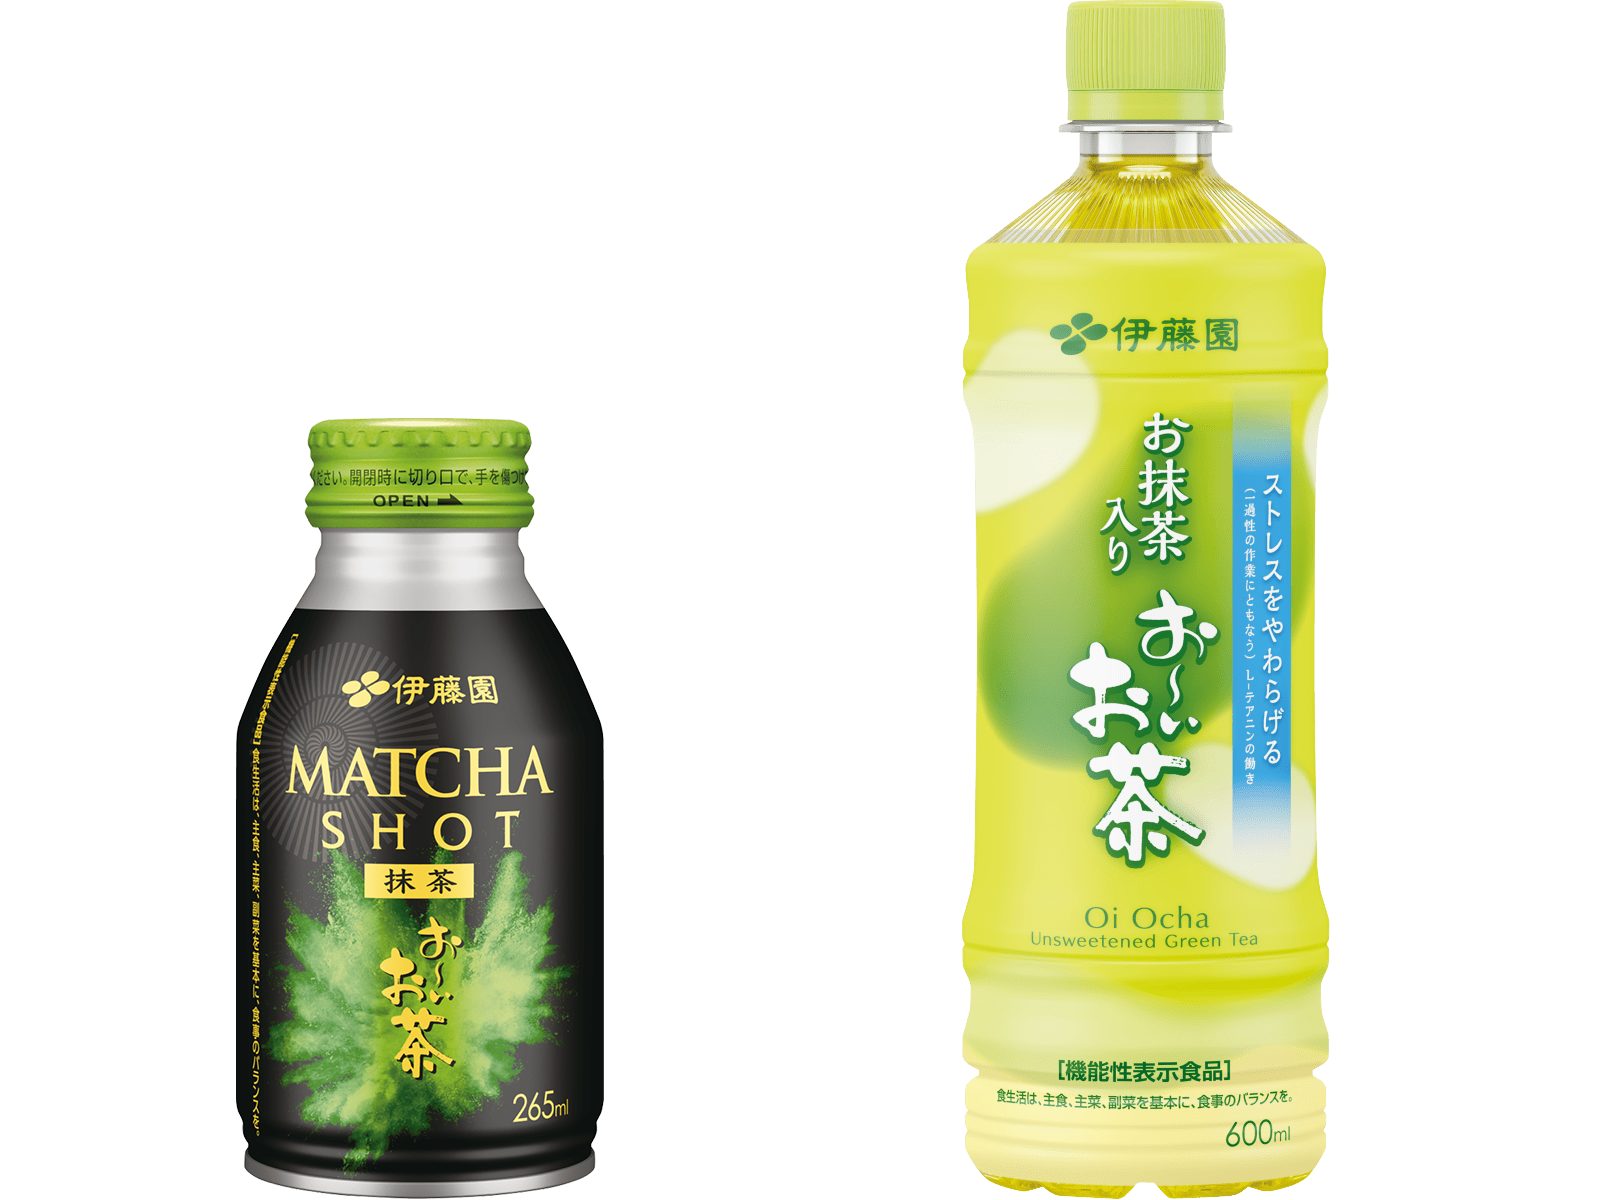 "Oi Ocha MATCHA SHOT", which contains theanine and tea catechins, was released by ITO EN, which develops matcha drinks related to cognitive function. ITO EN, which promotes the appeal of tea to health-conscious consumers through matcha, has released "Oi Ocha with Matcha," which contains "L-theanine."